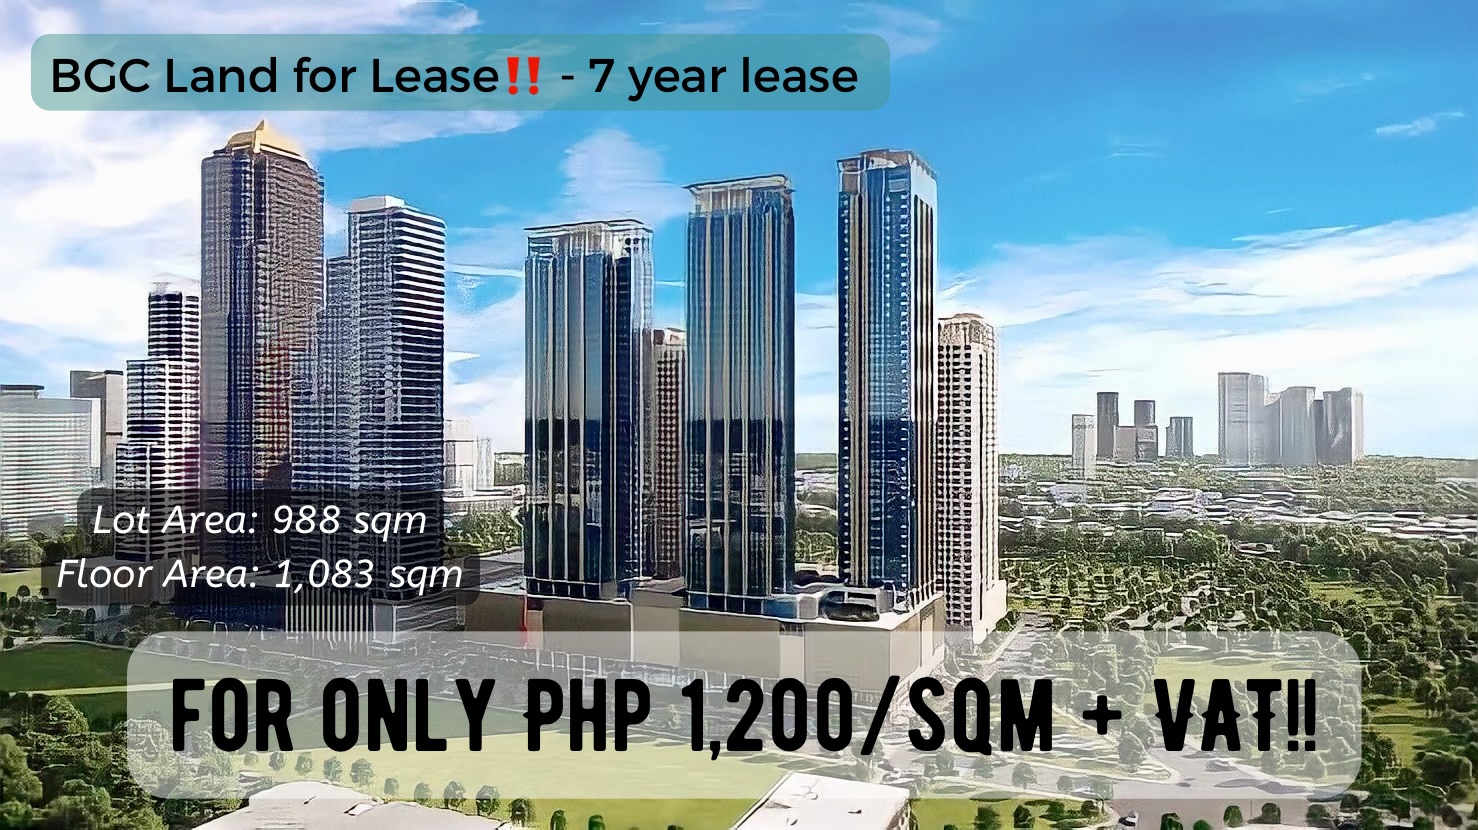 BGC Land for Lease – 7 year lease‼️